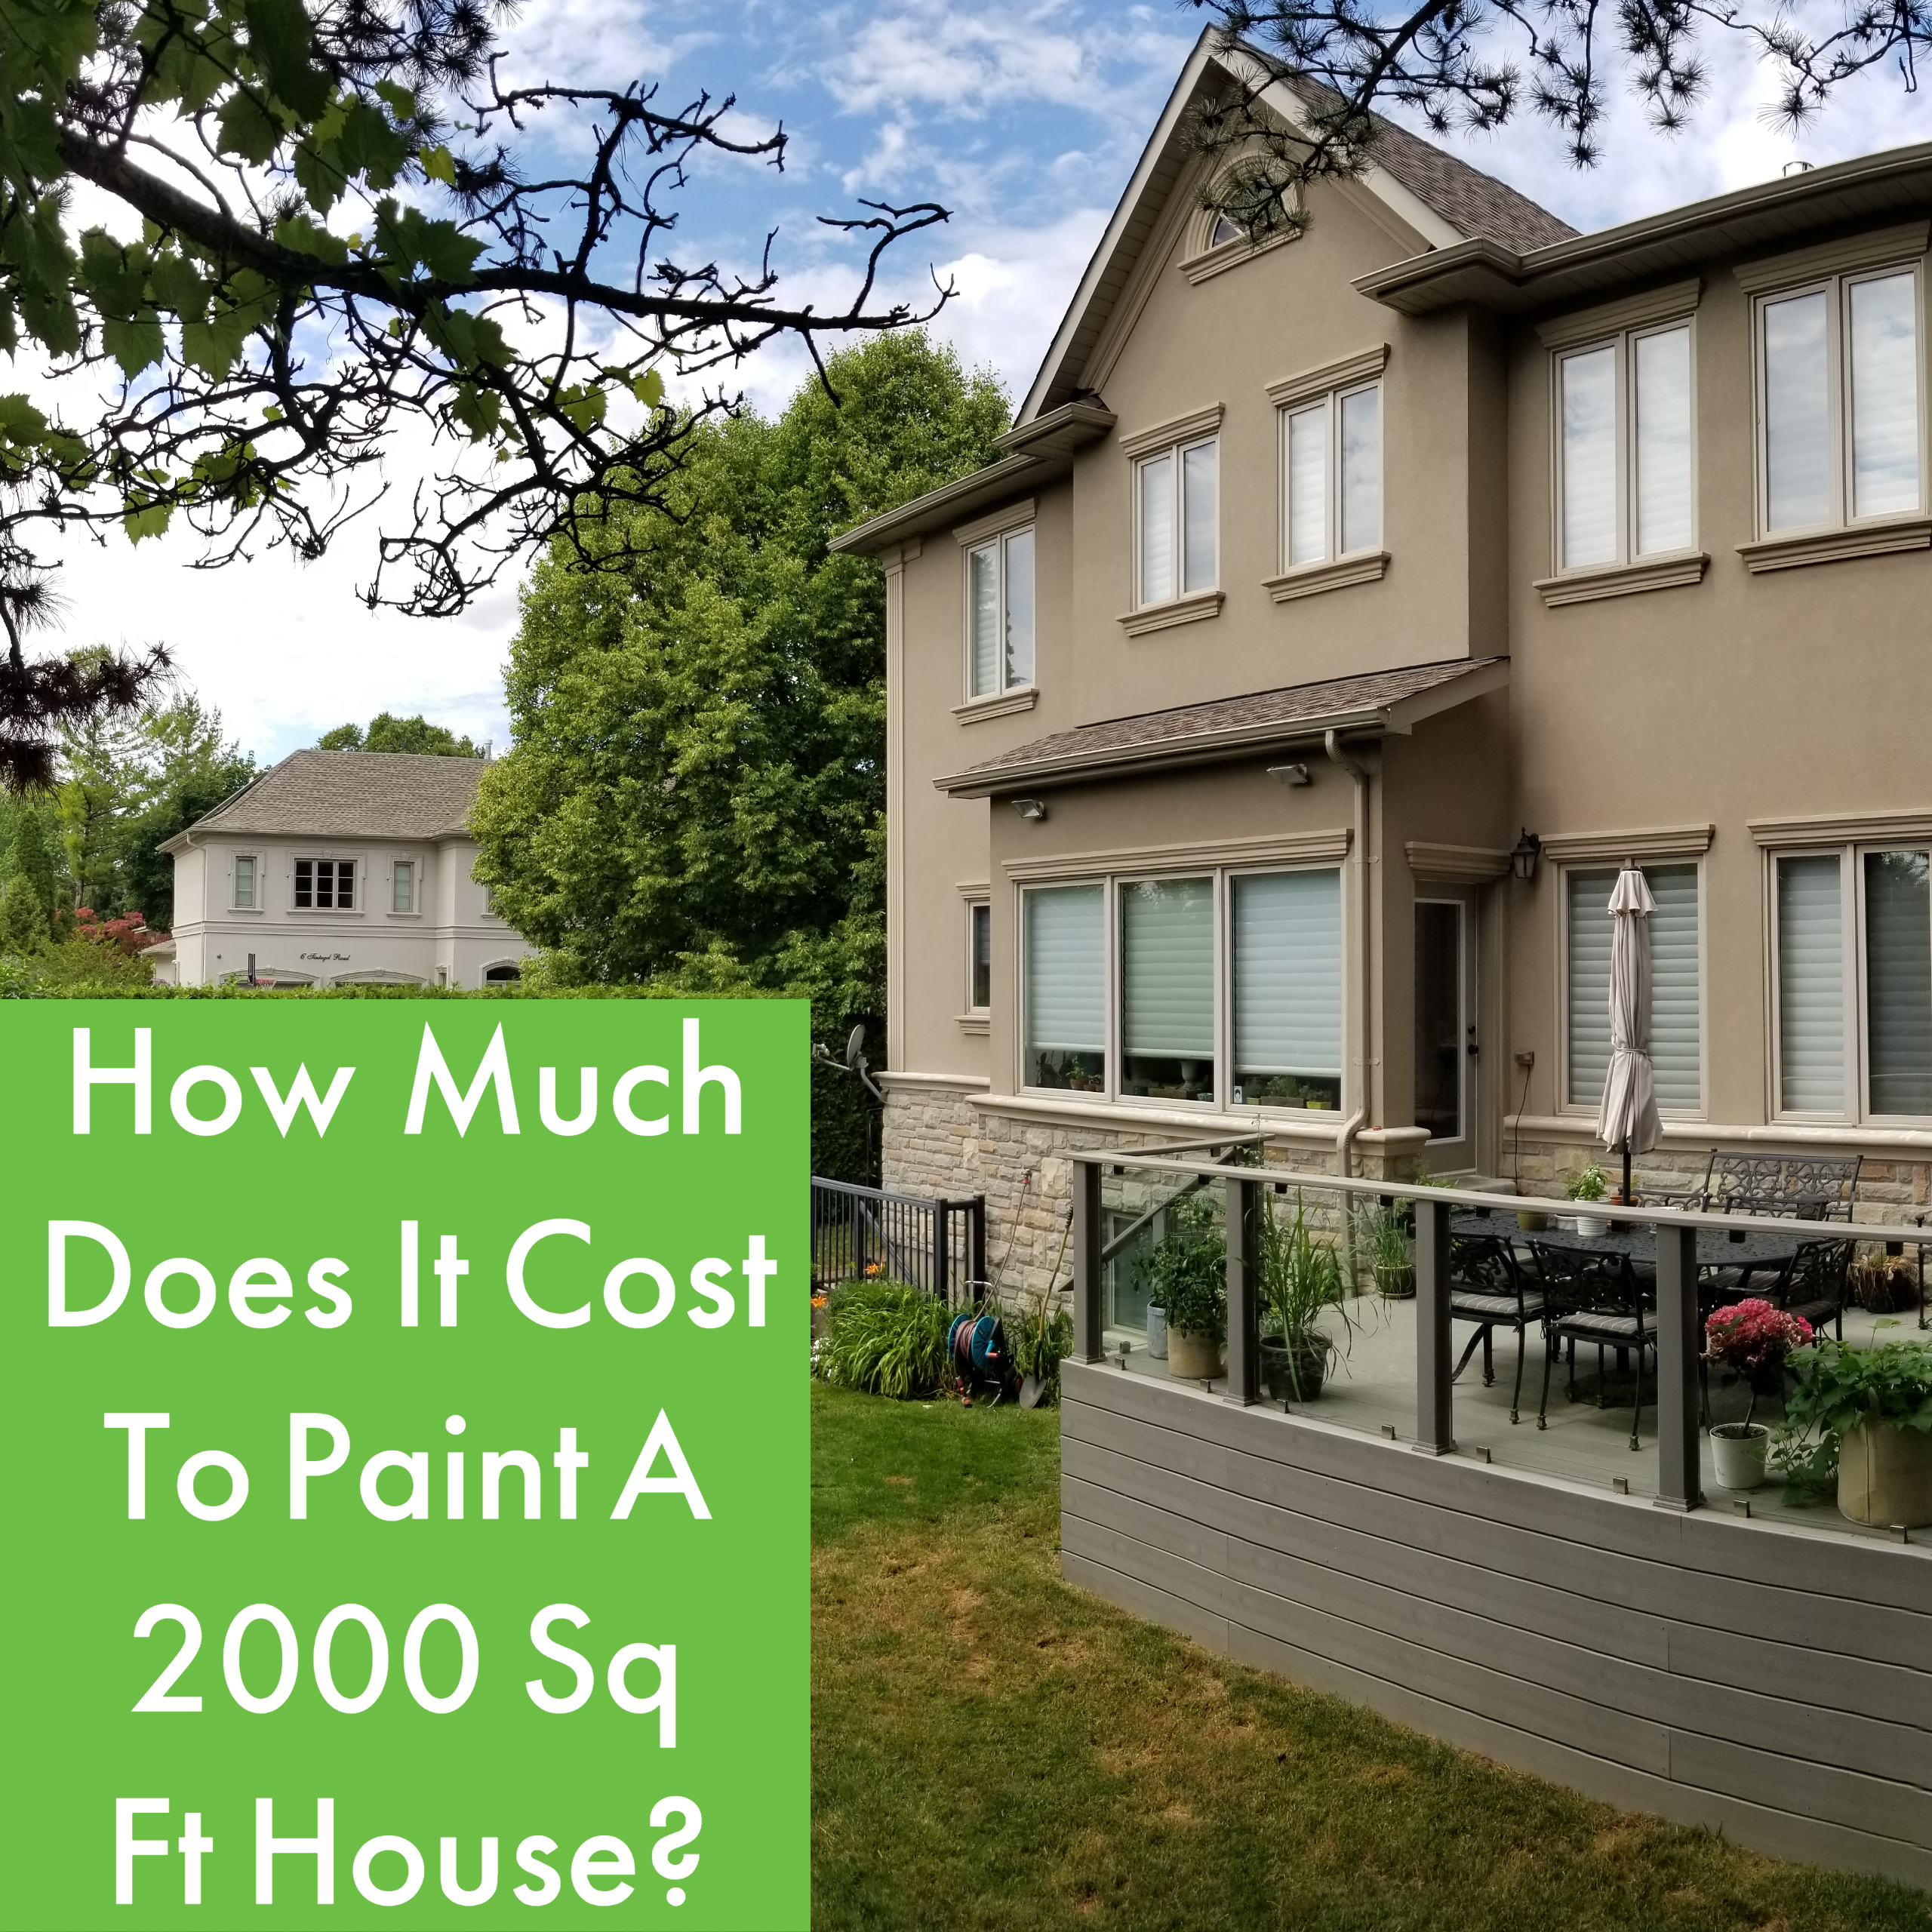 How Much Does It Cost To Paint A 2000 Sq Ft House